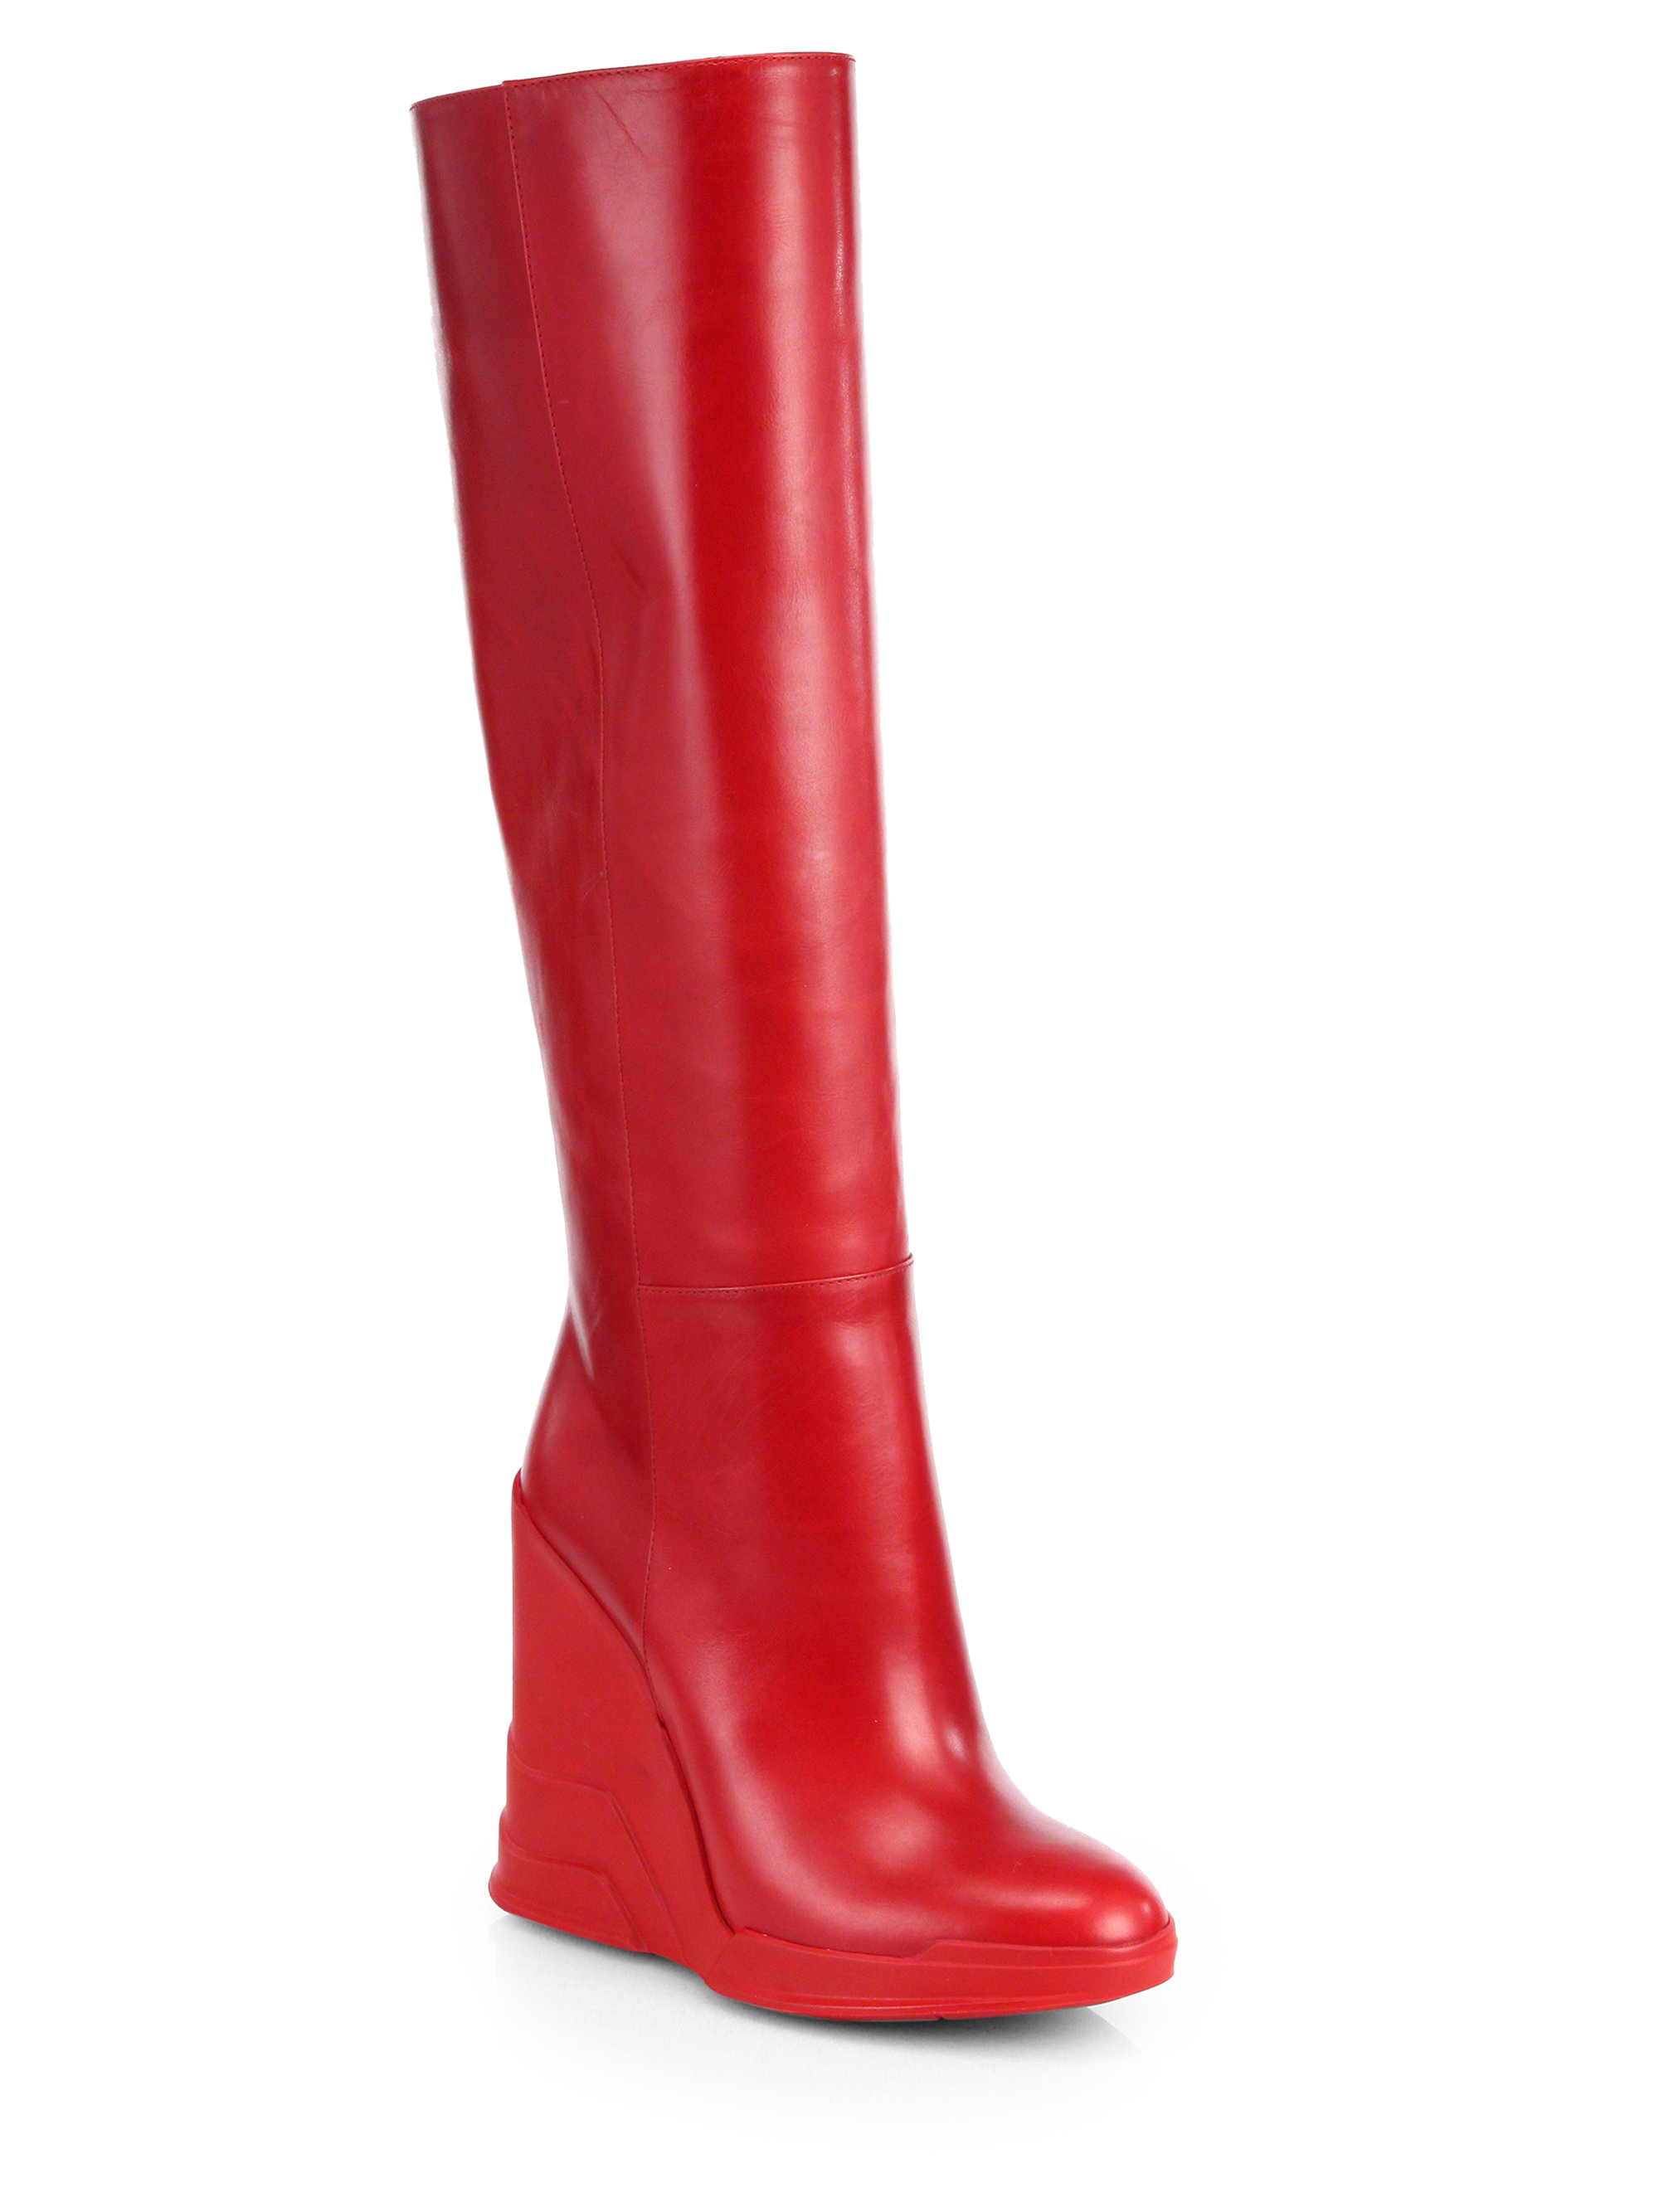 Prada Leather Knee-High Wedge Boots in Red | Lyst